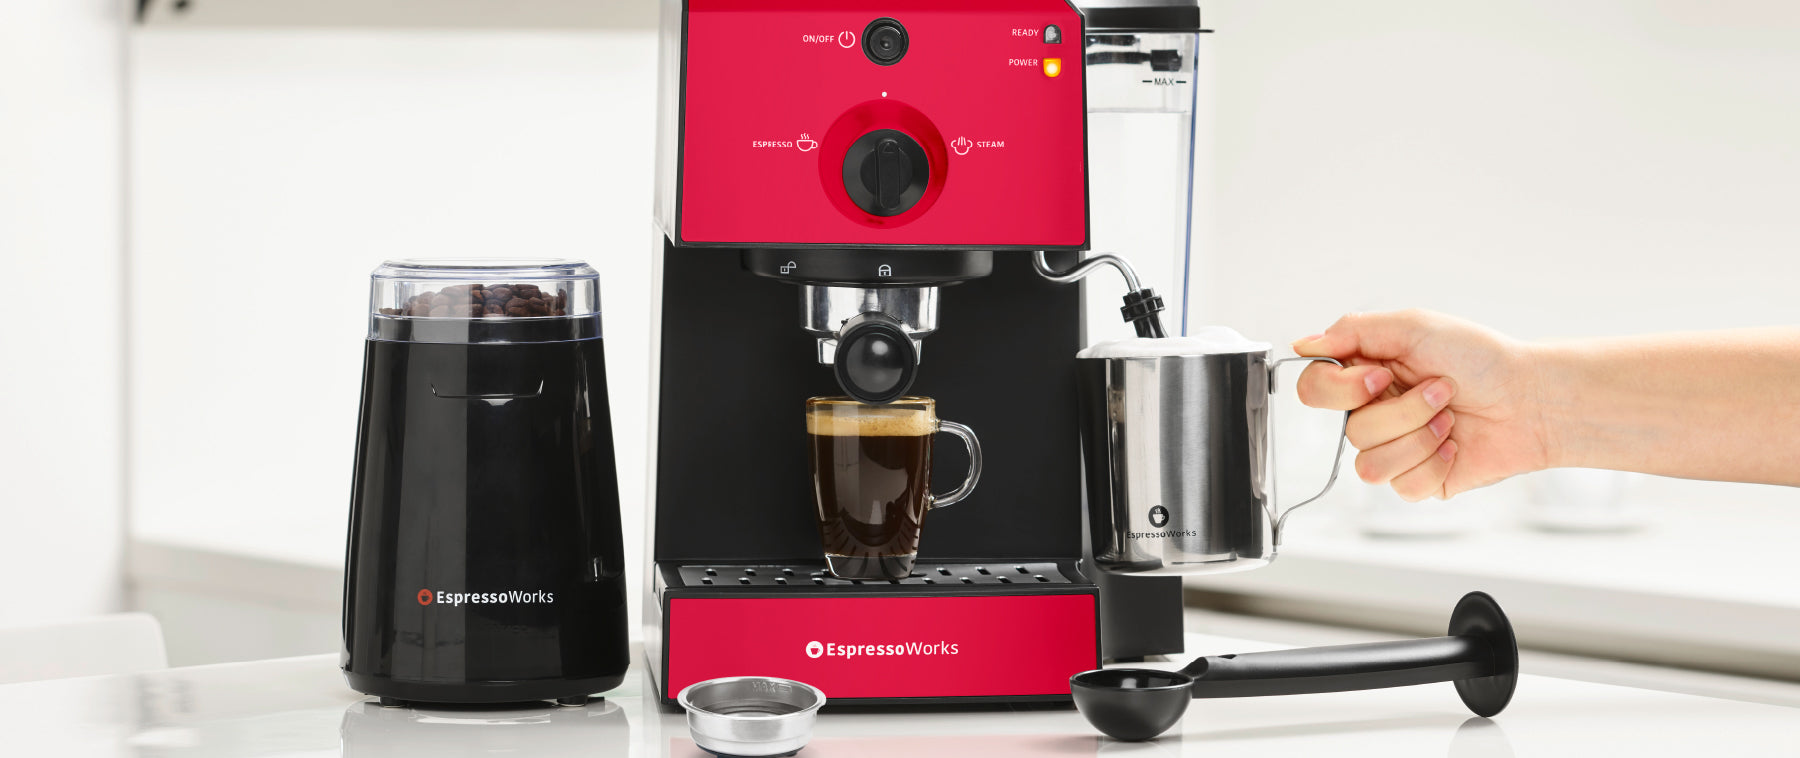 7-Piece EspressoWorks All-In-One Set - EspressoWorks Holiday Gift Guide for Coffee Lovers